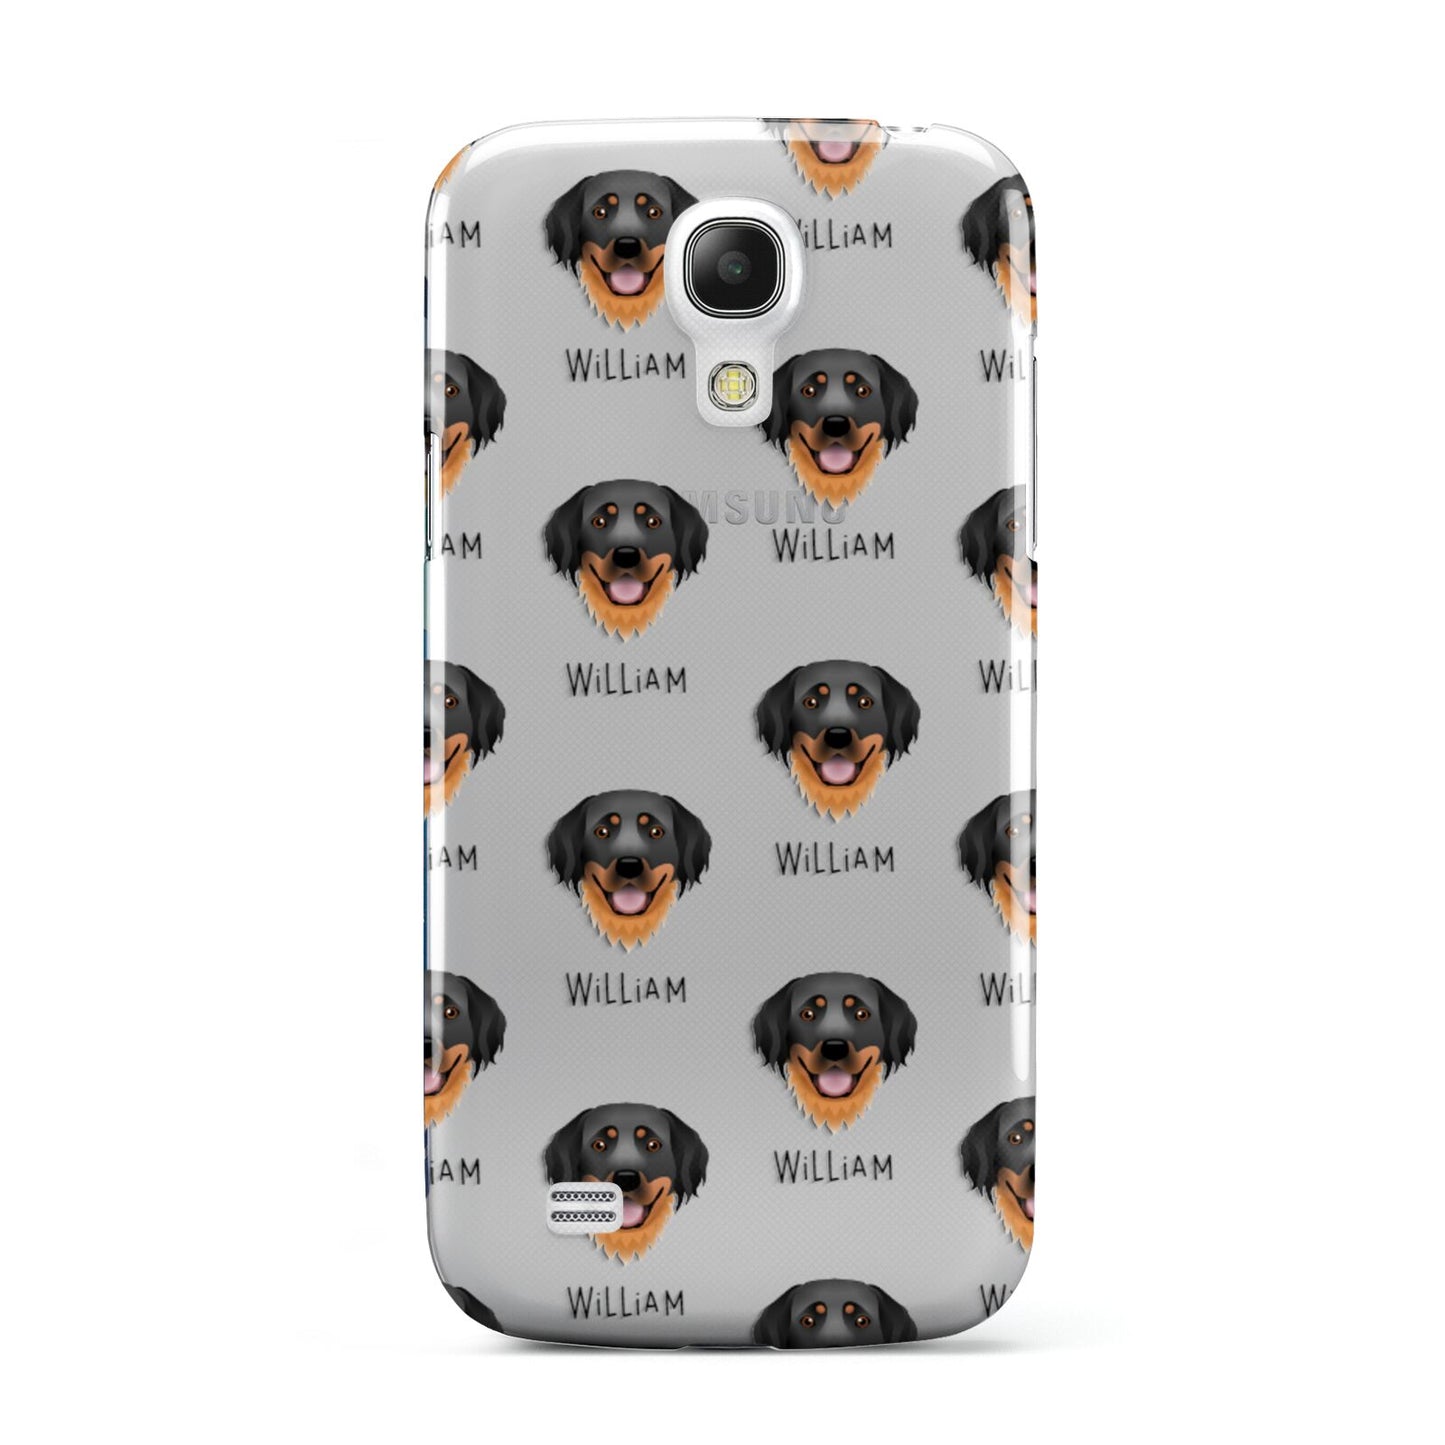 Hovawart Icon with Name Samsung Galaxy S4 Mini Case